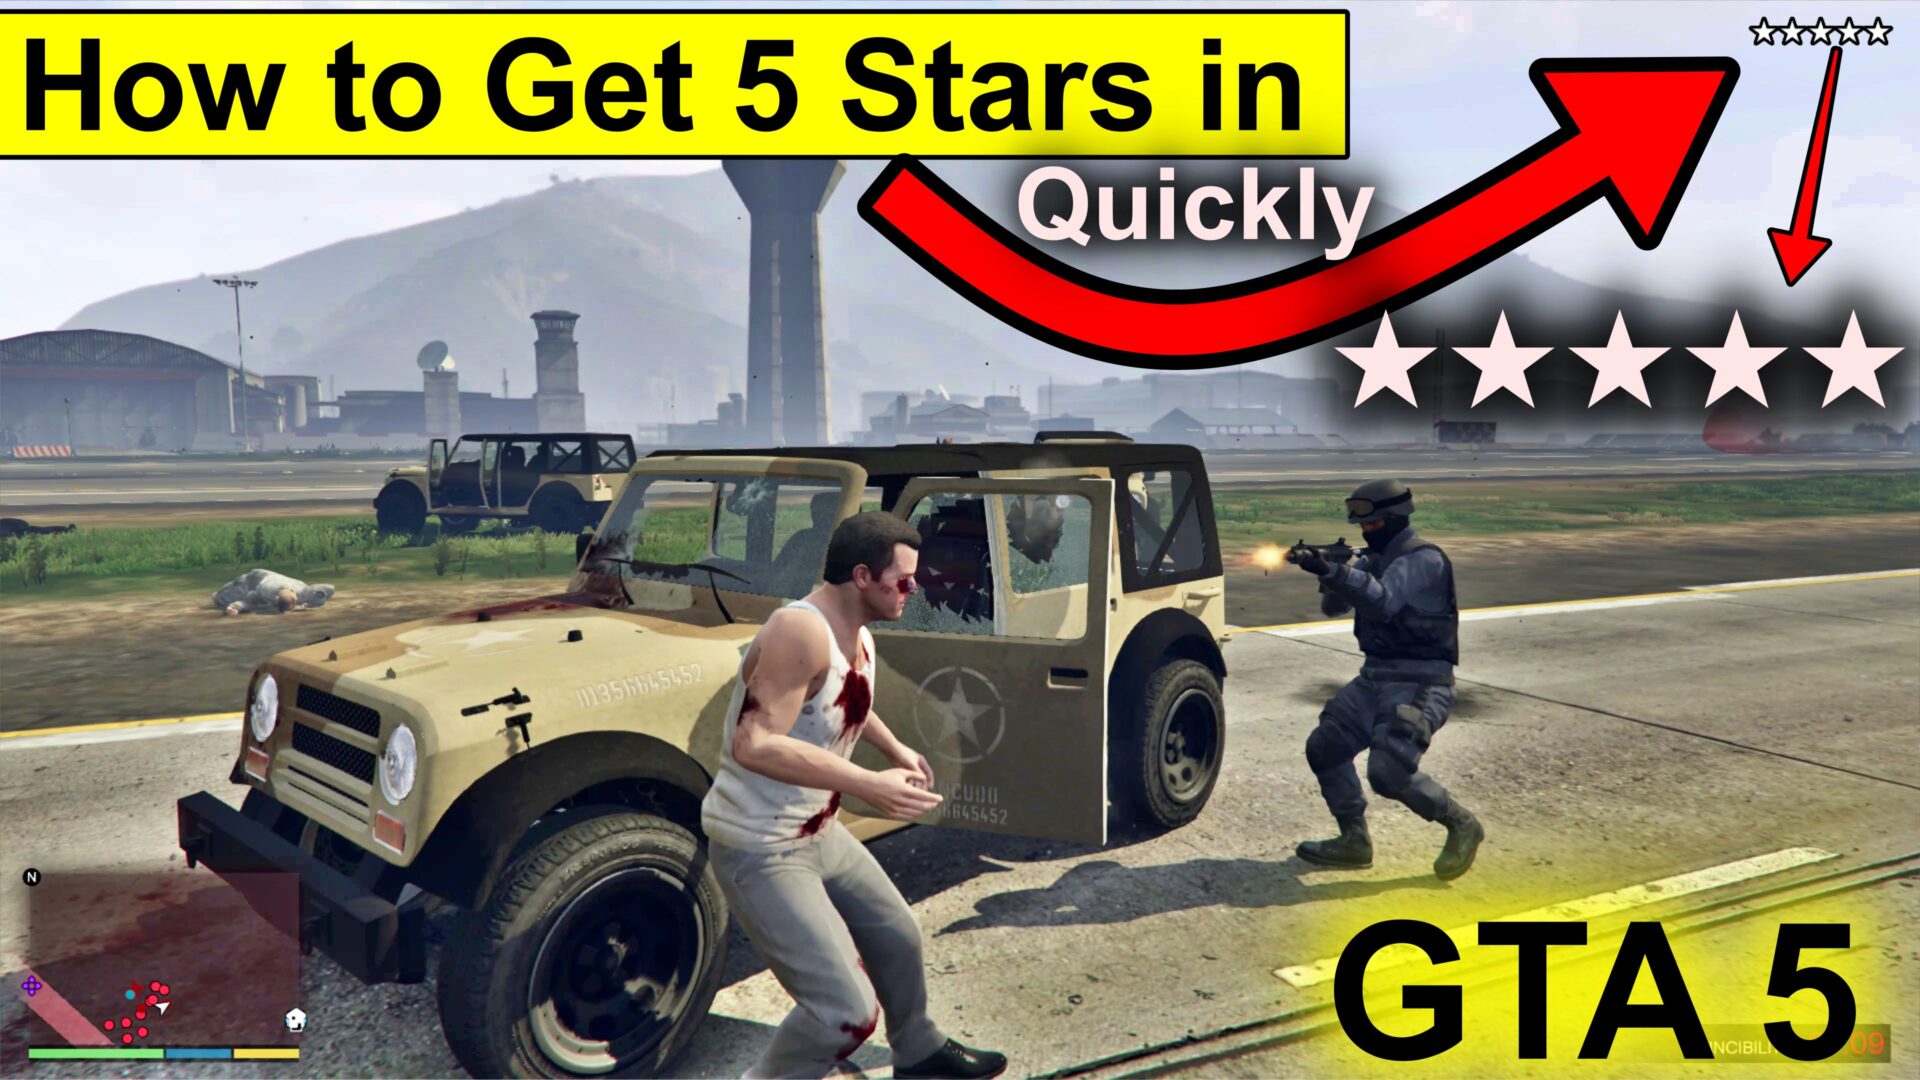 get 5 stars in GTA 5 More quickly